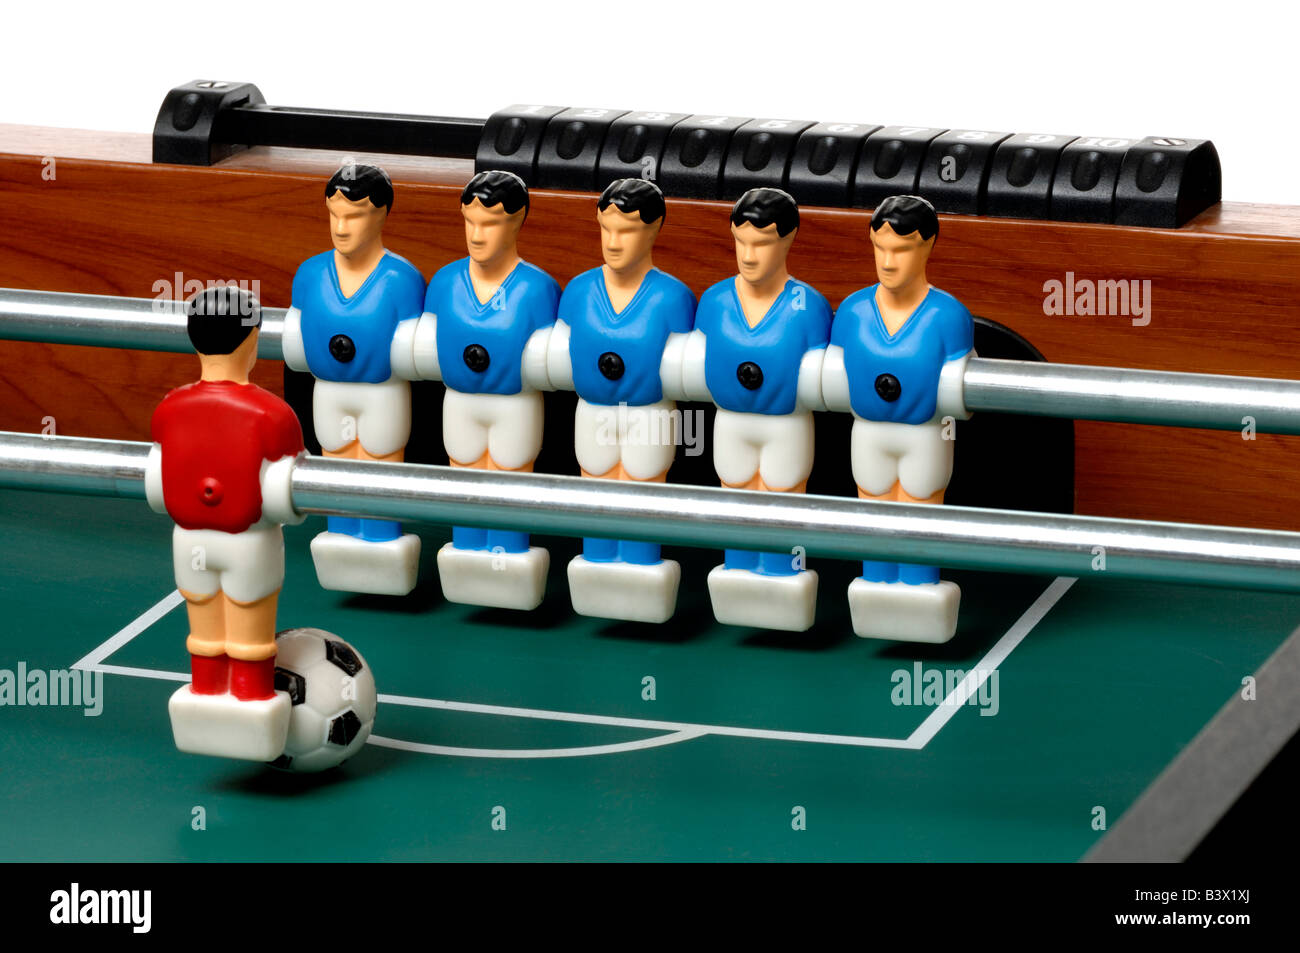 Goalmouth Foosball Banque D'Images